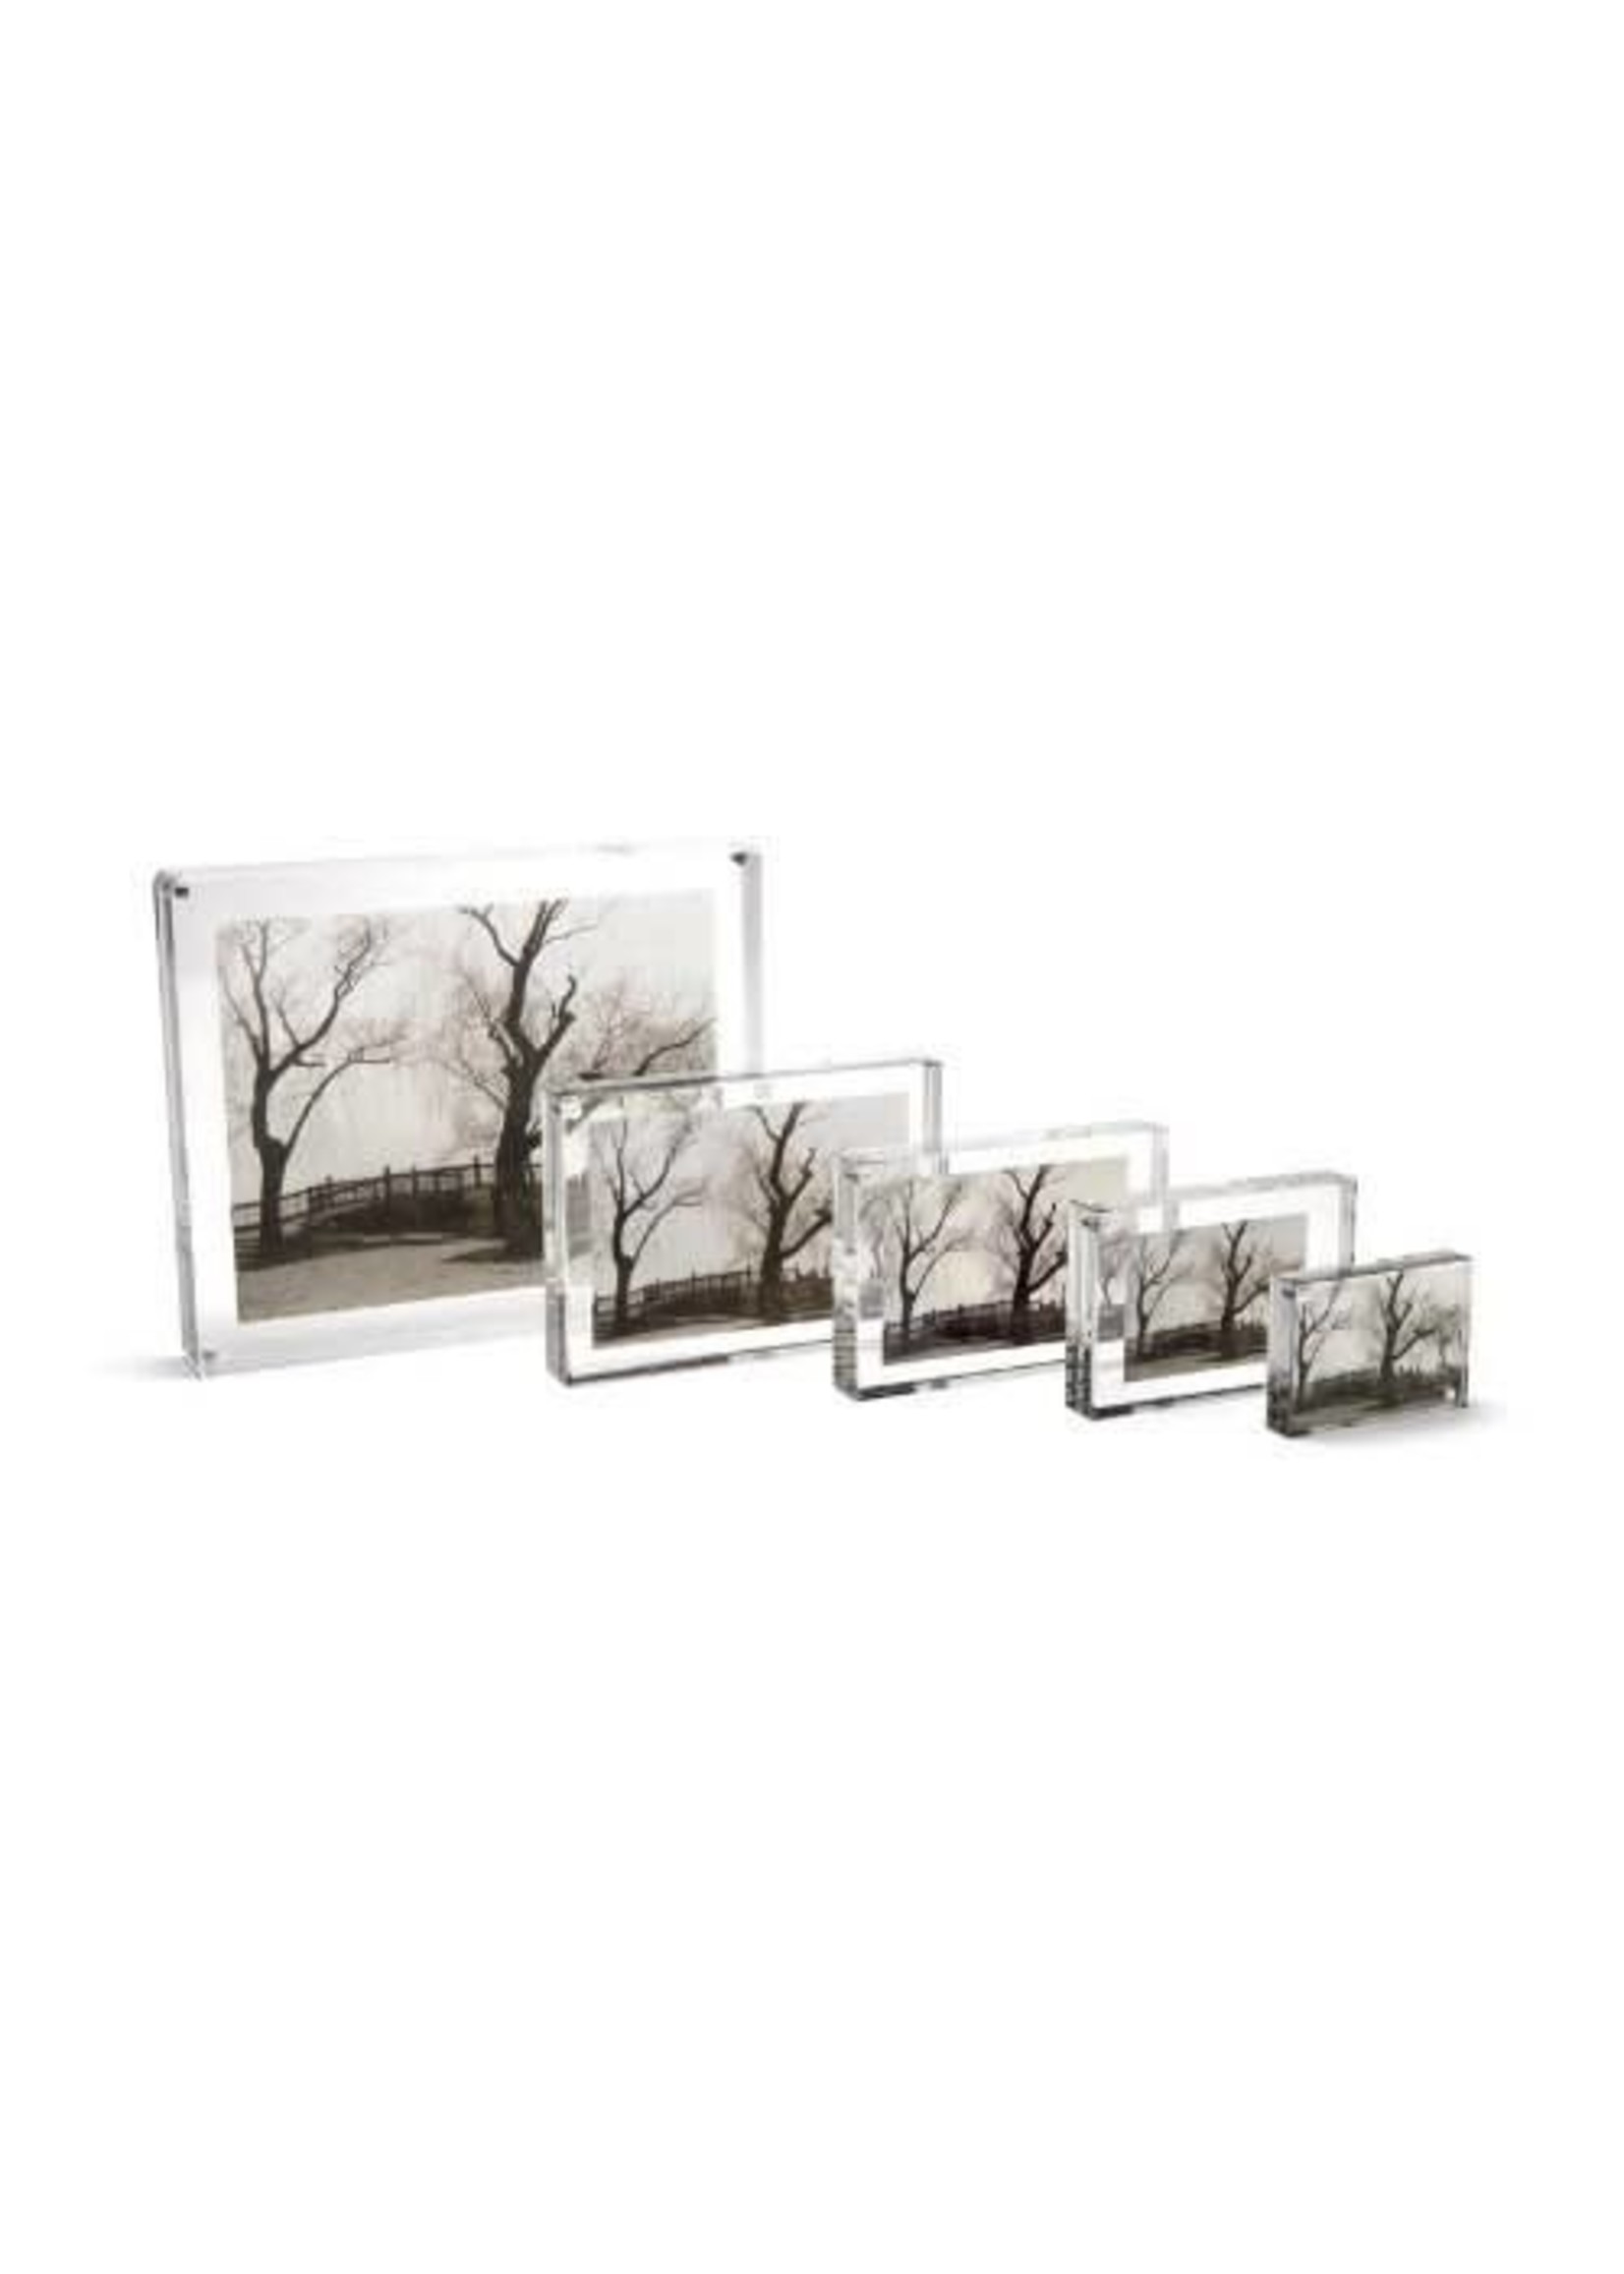 Canetti Design Group 4X6" CLEAR ORIGINAL MAGNET FRAME